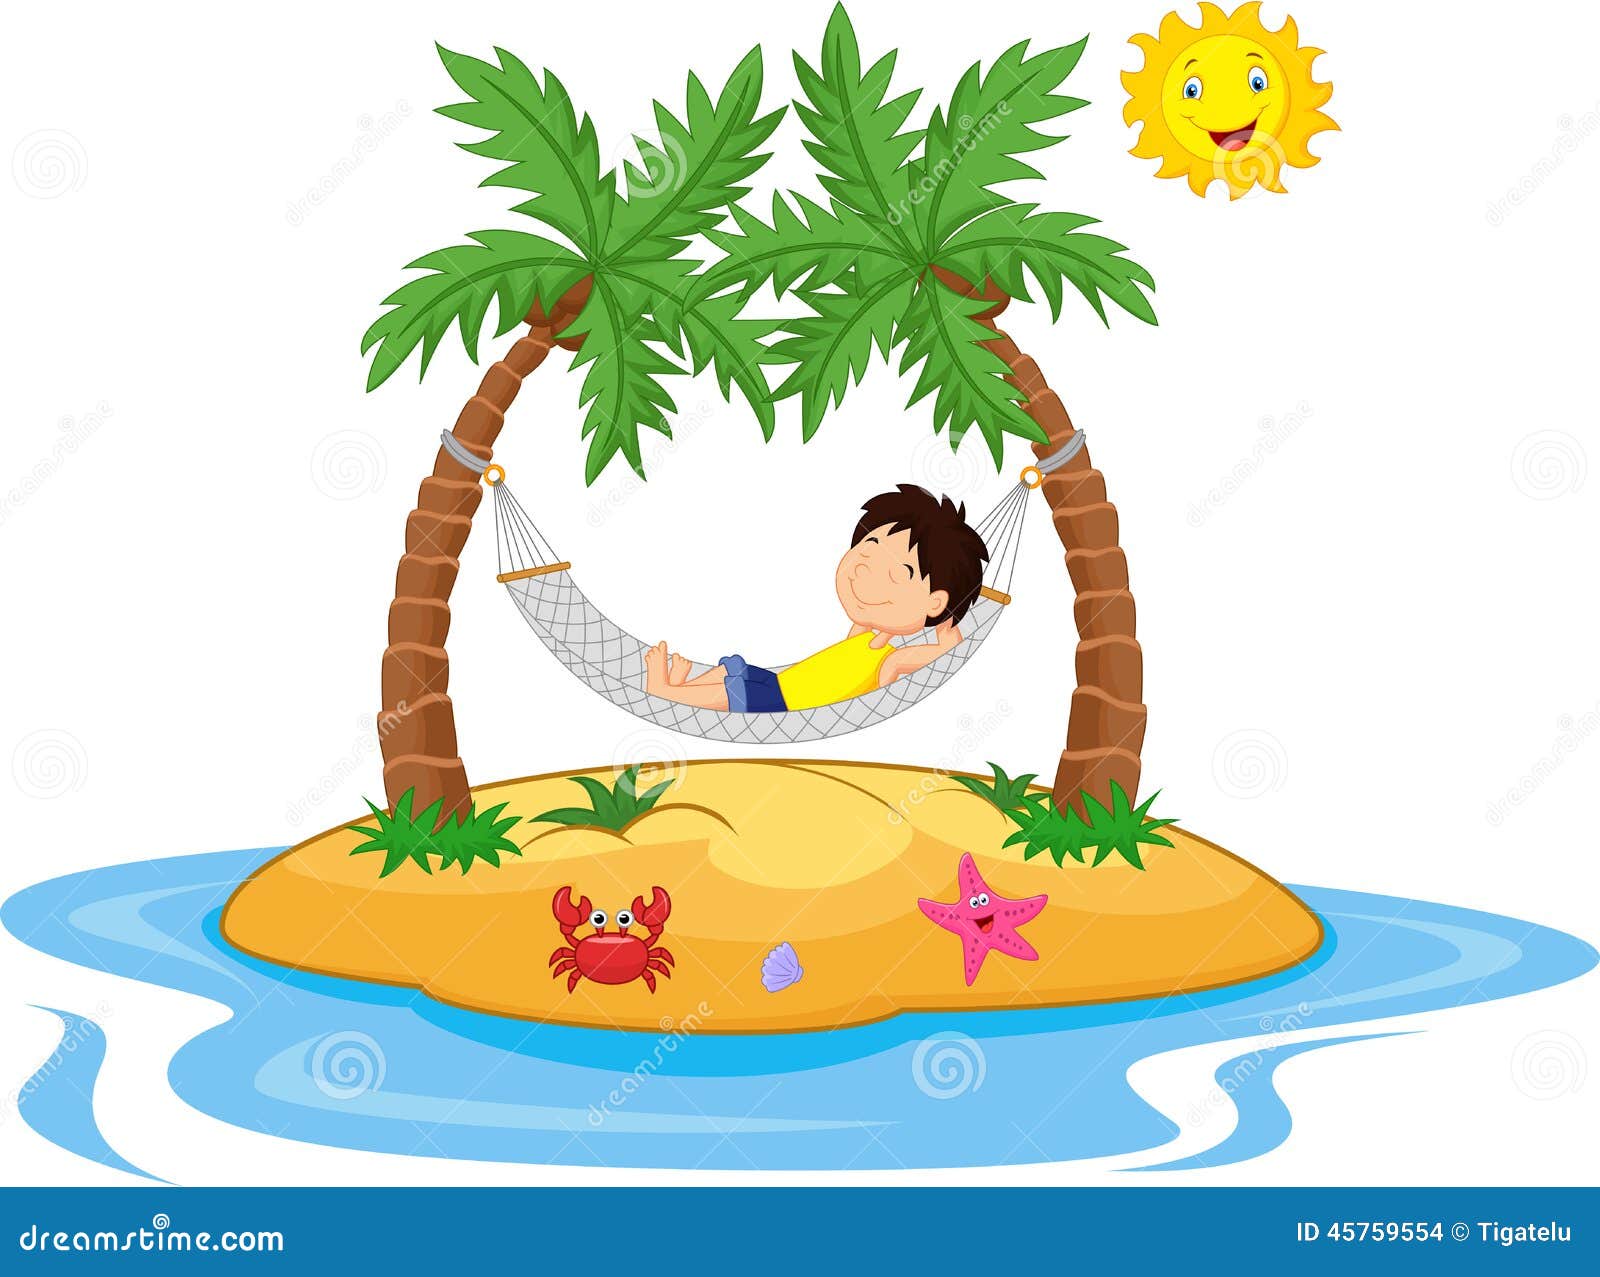 relaxation clipart images - photo #36